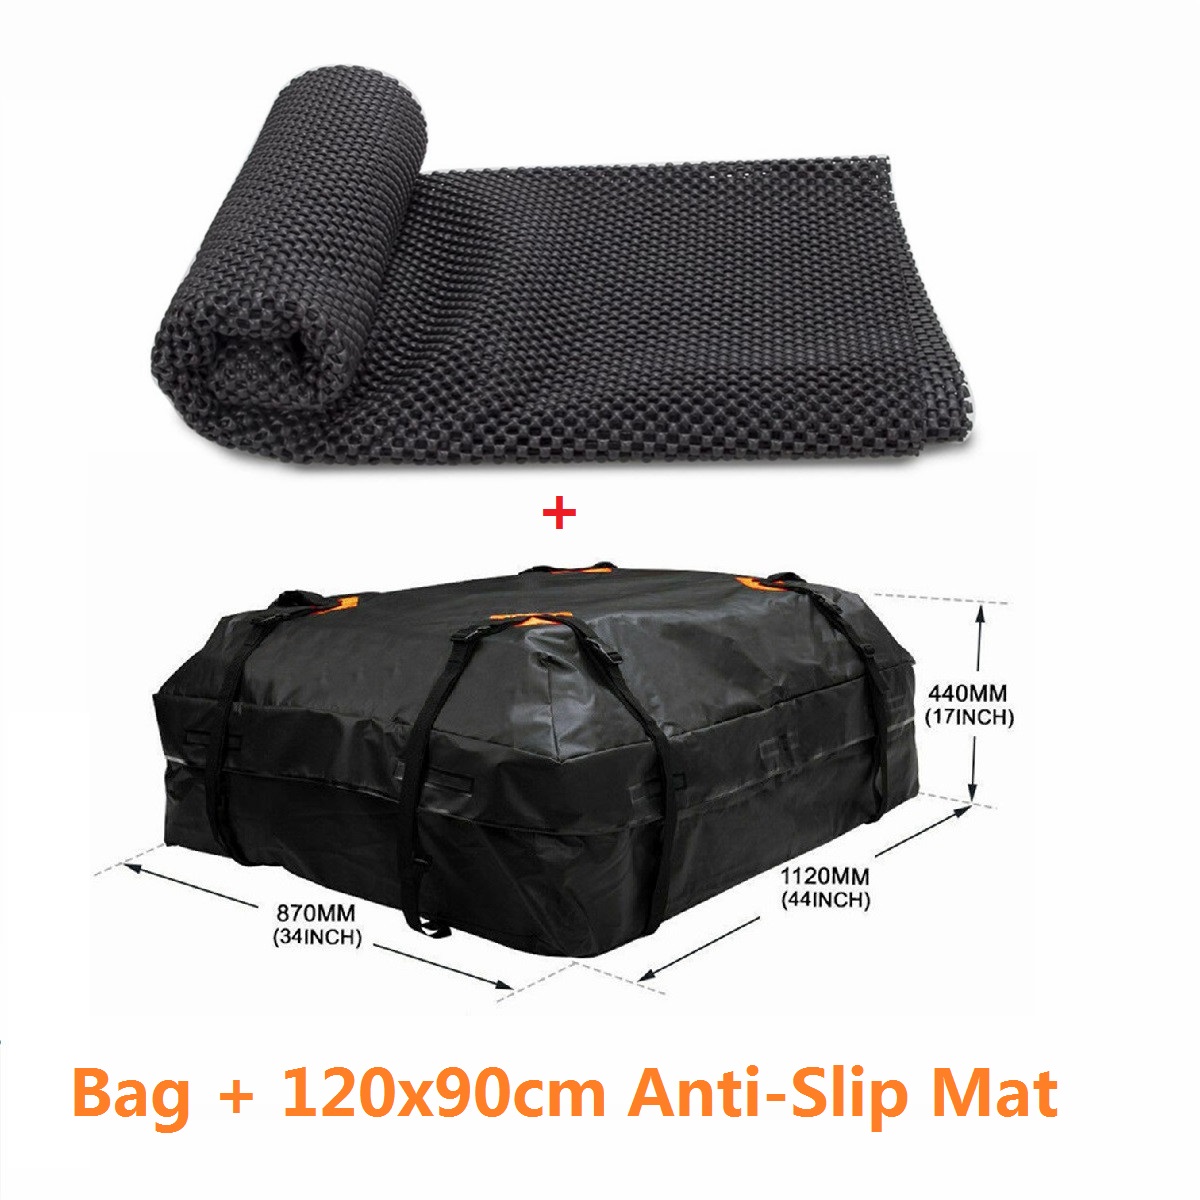 475L-Car-Rooftop-Cargo-Bag-420D-Waterproof-Car-Top-Carrier-Bag-Luggage-Storage-for-Outdoor-Travel-Ca-1888699-5